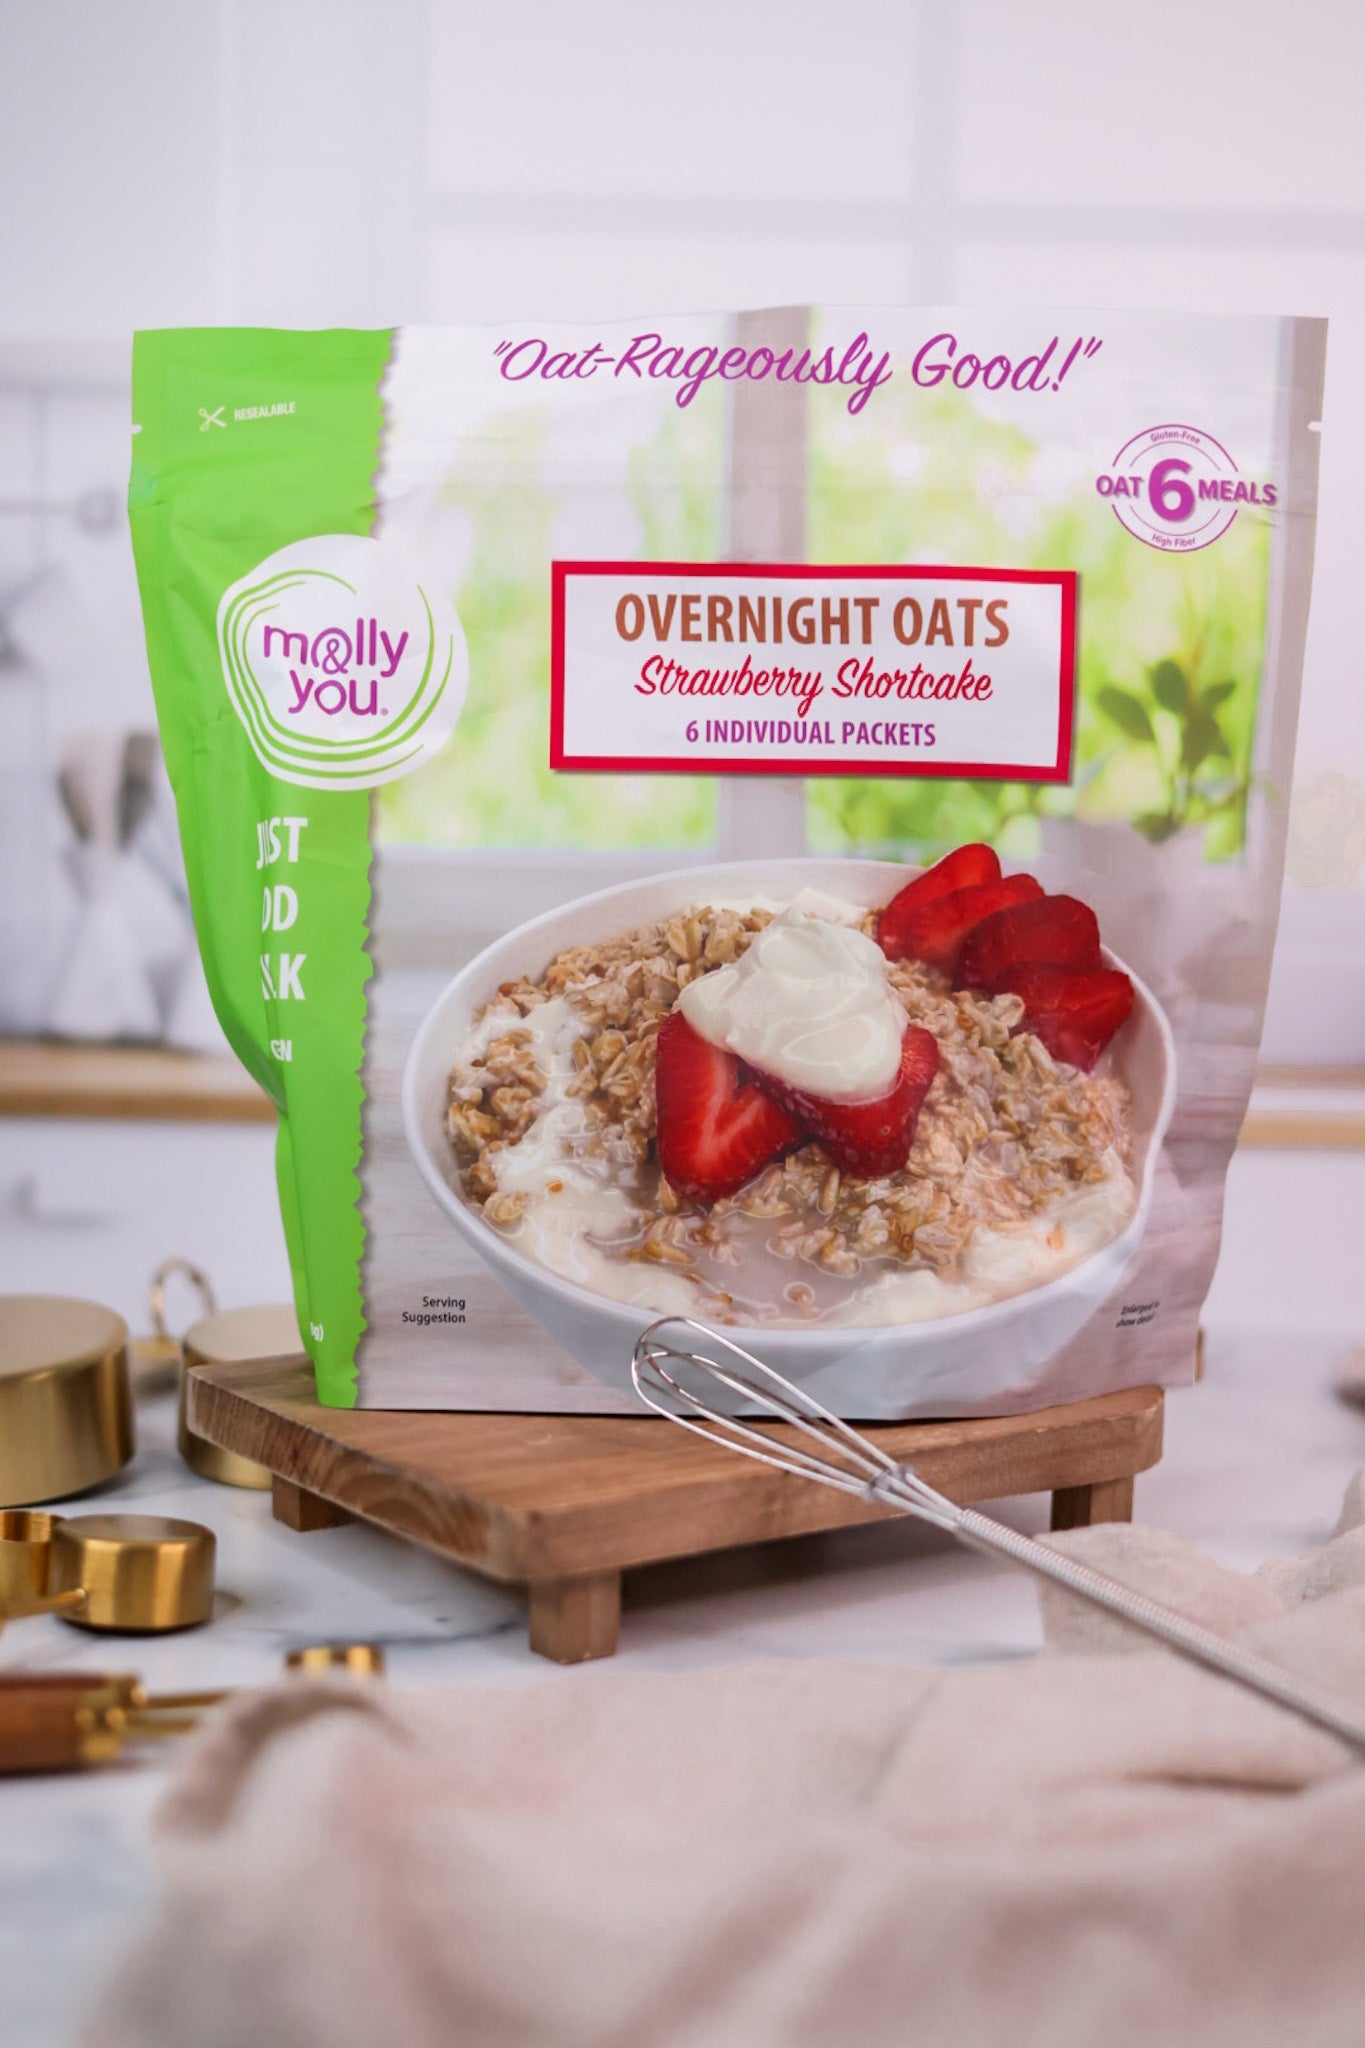 Overnight Oats (Two Flavors) - Whiskey Skies